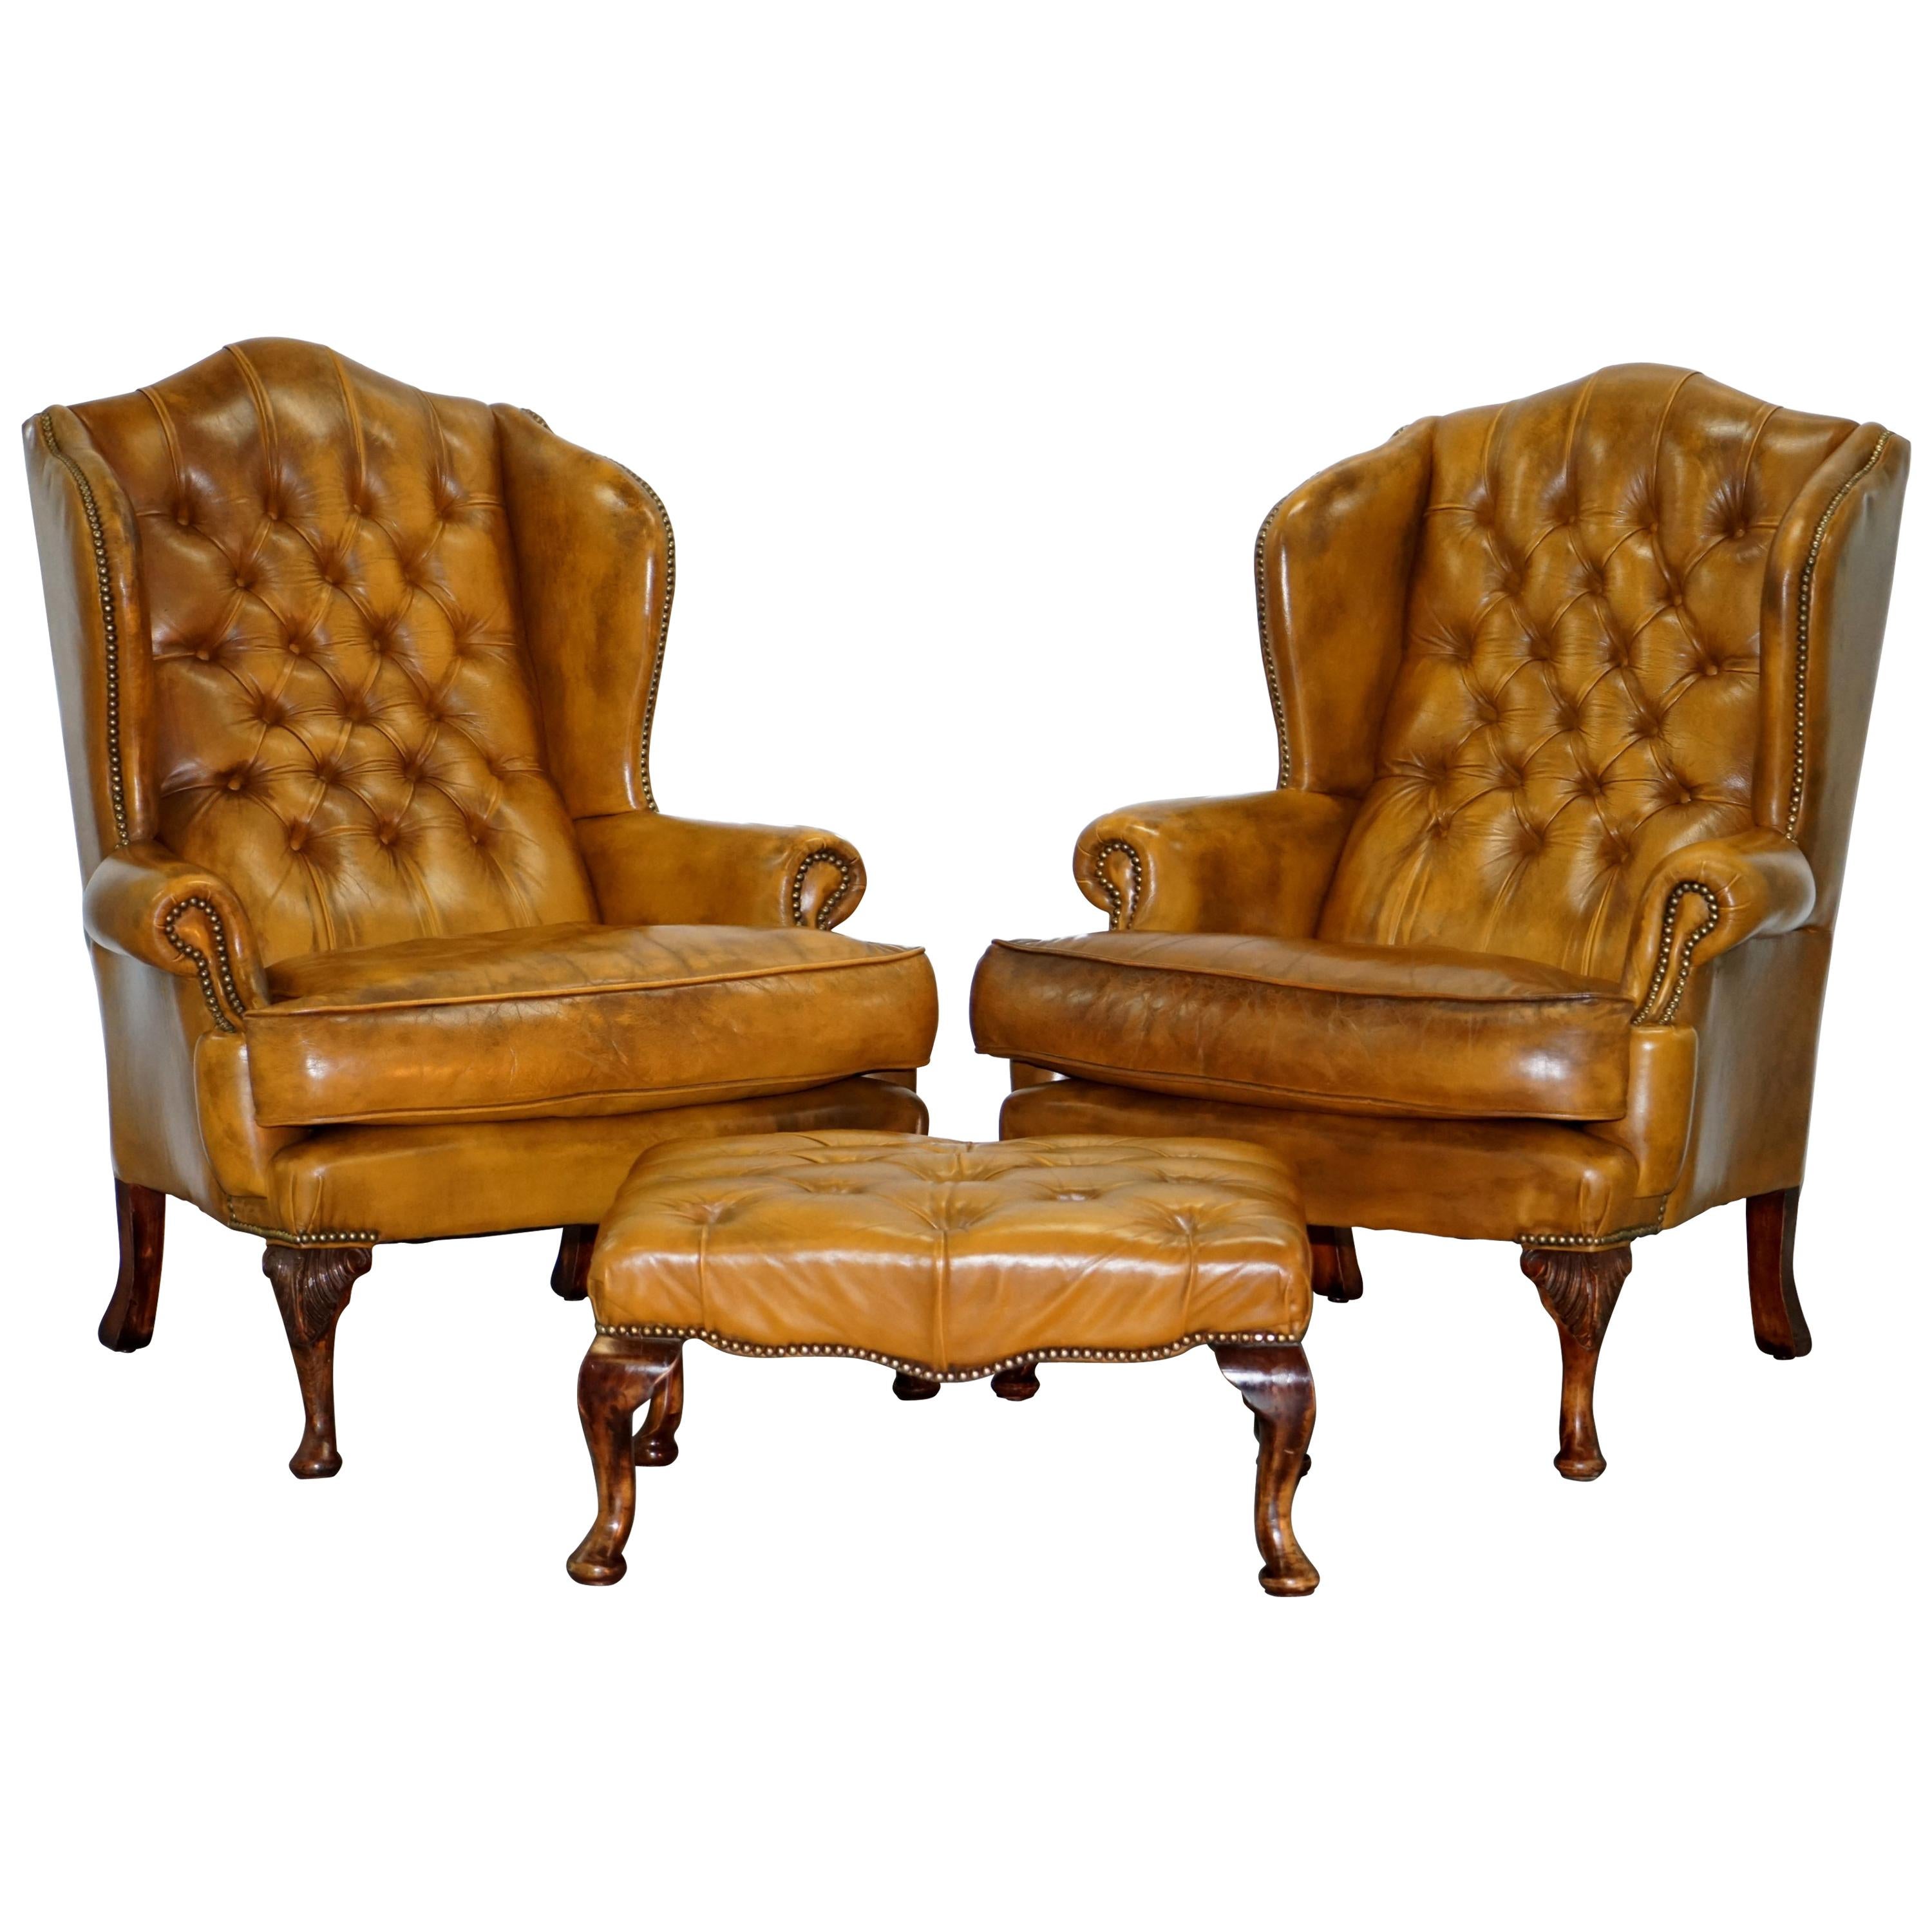 Pair of William Morris Chesterfield Wingback Armchairs & Footstool Brown Leather